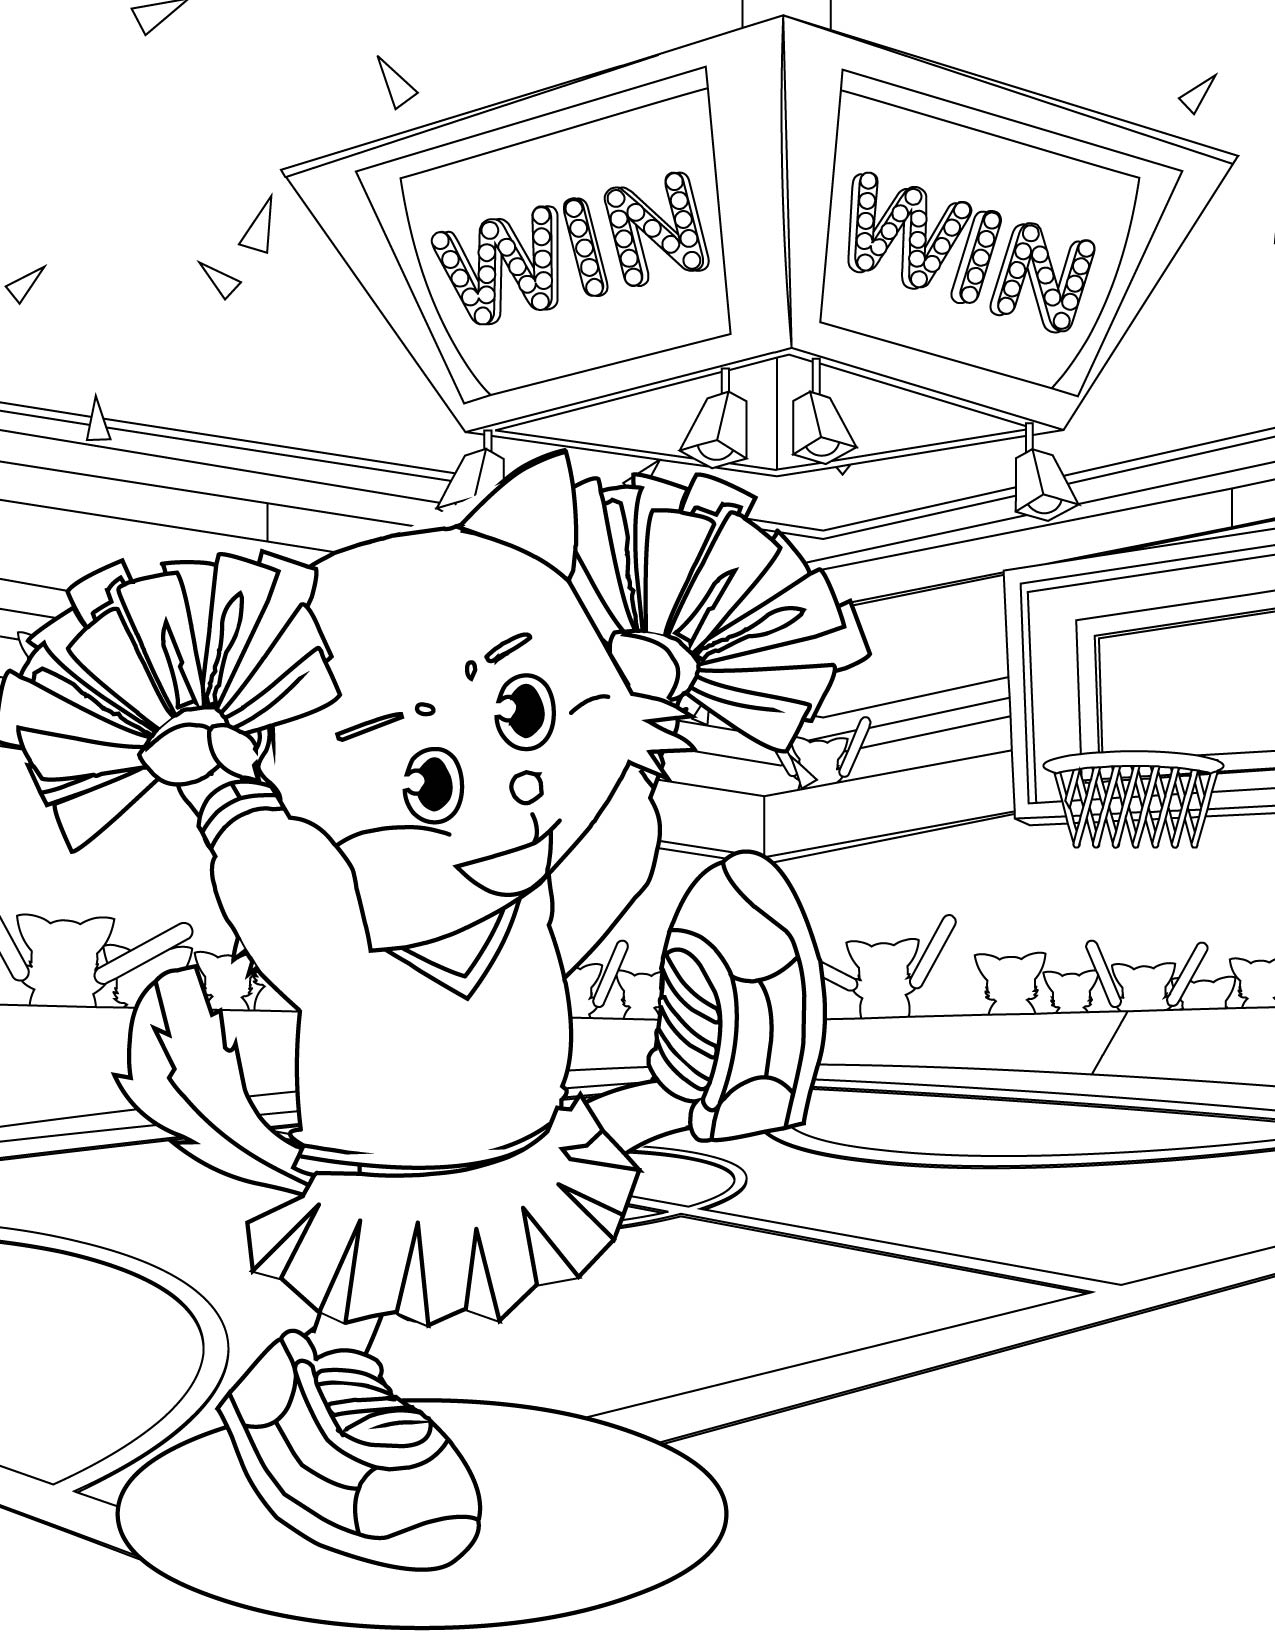 cheer-coloring-pages-to-print-at-getcolorings-free-printable